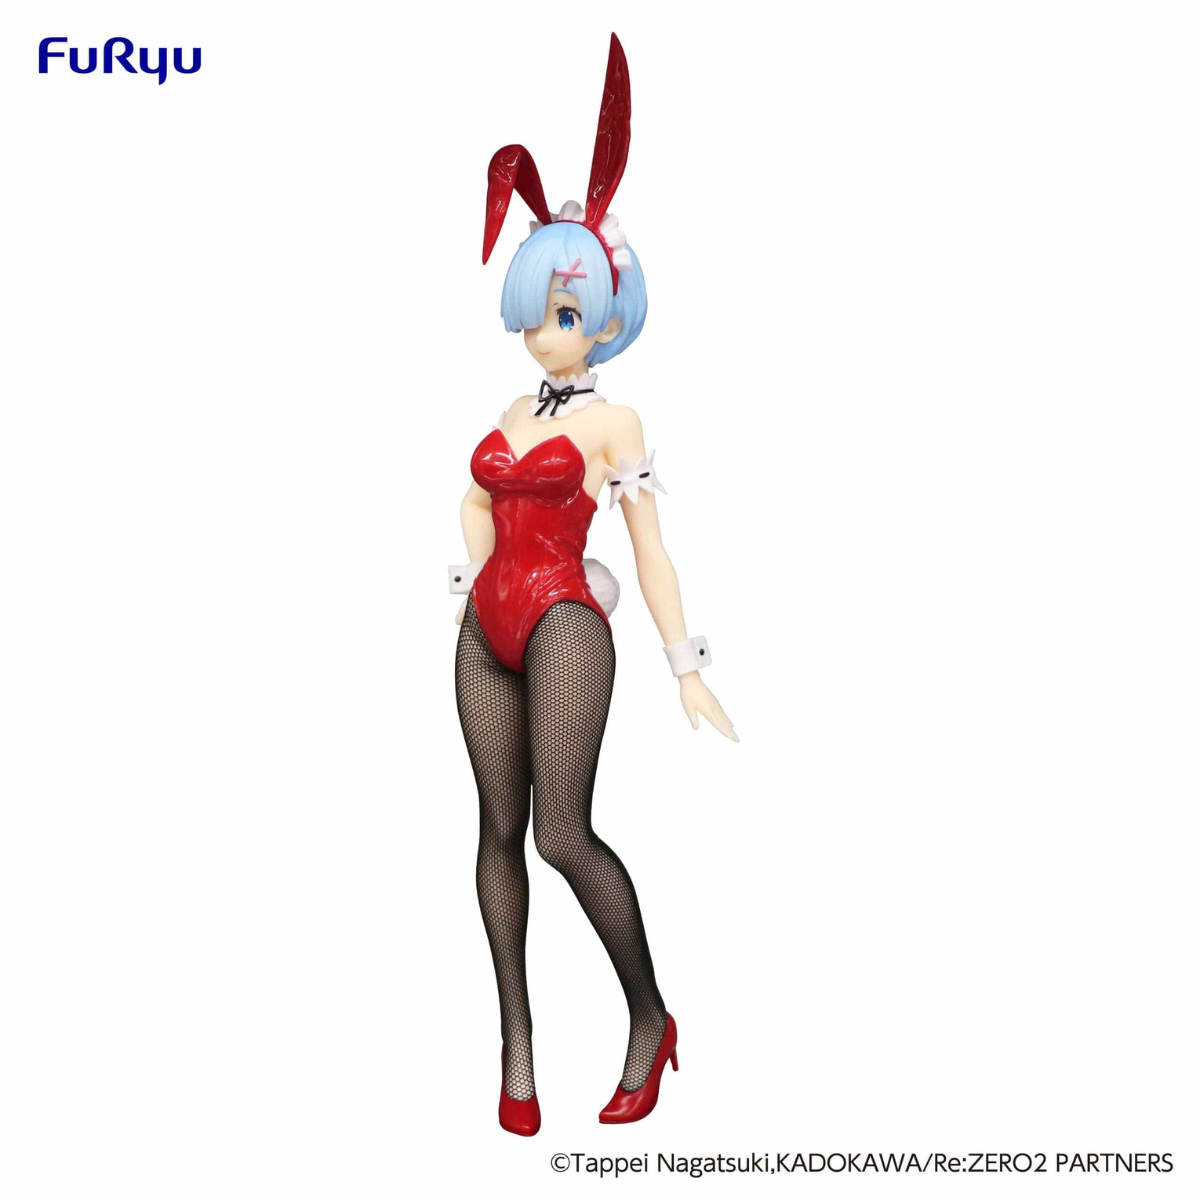 Re:Zero Starting Life in Another World BiCute Bunnies Figure "Rem" (Red Color Ver.)-FuRyu-Ace Cards & Collectibles